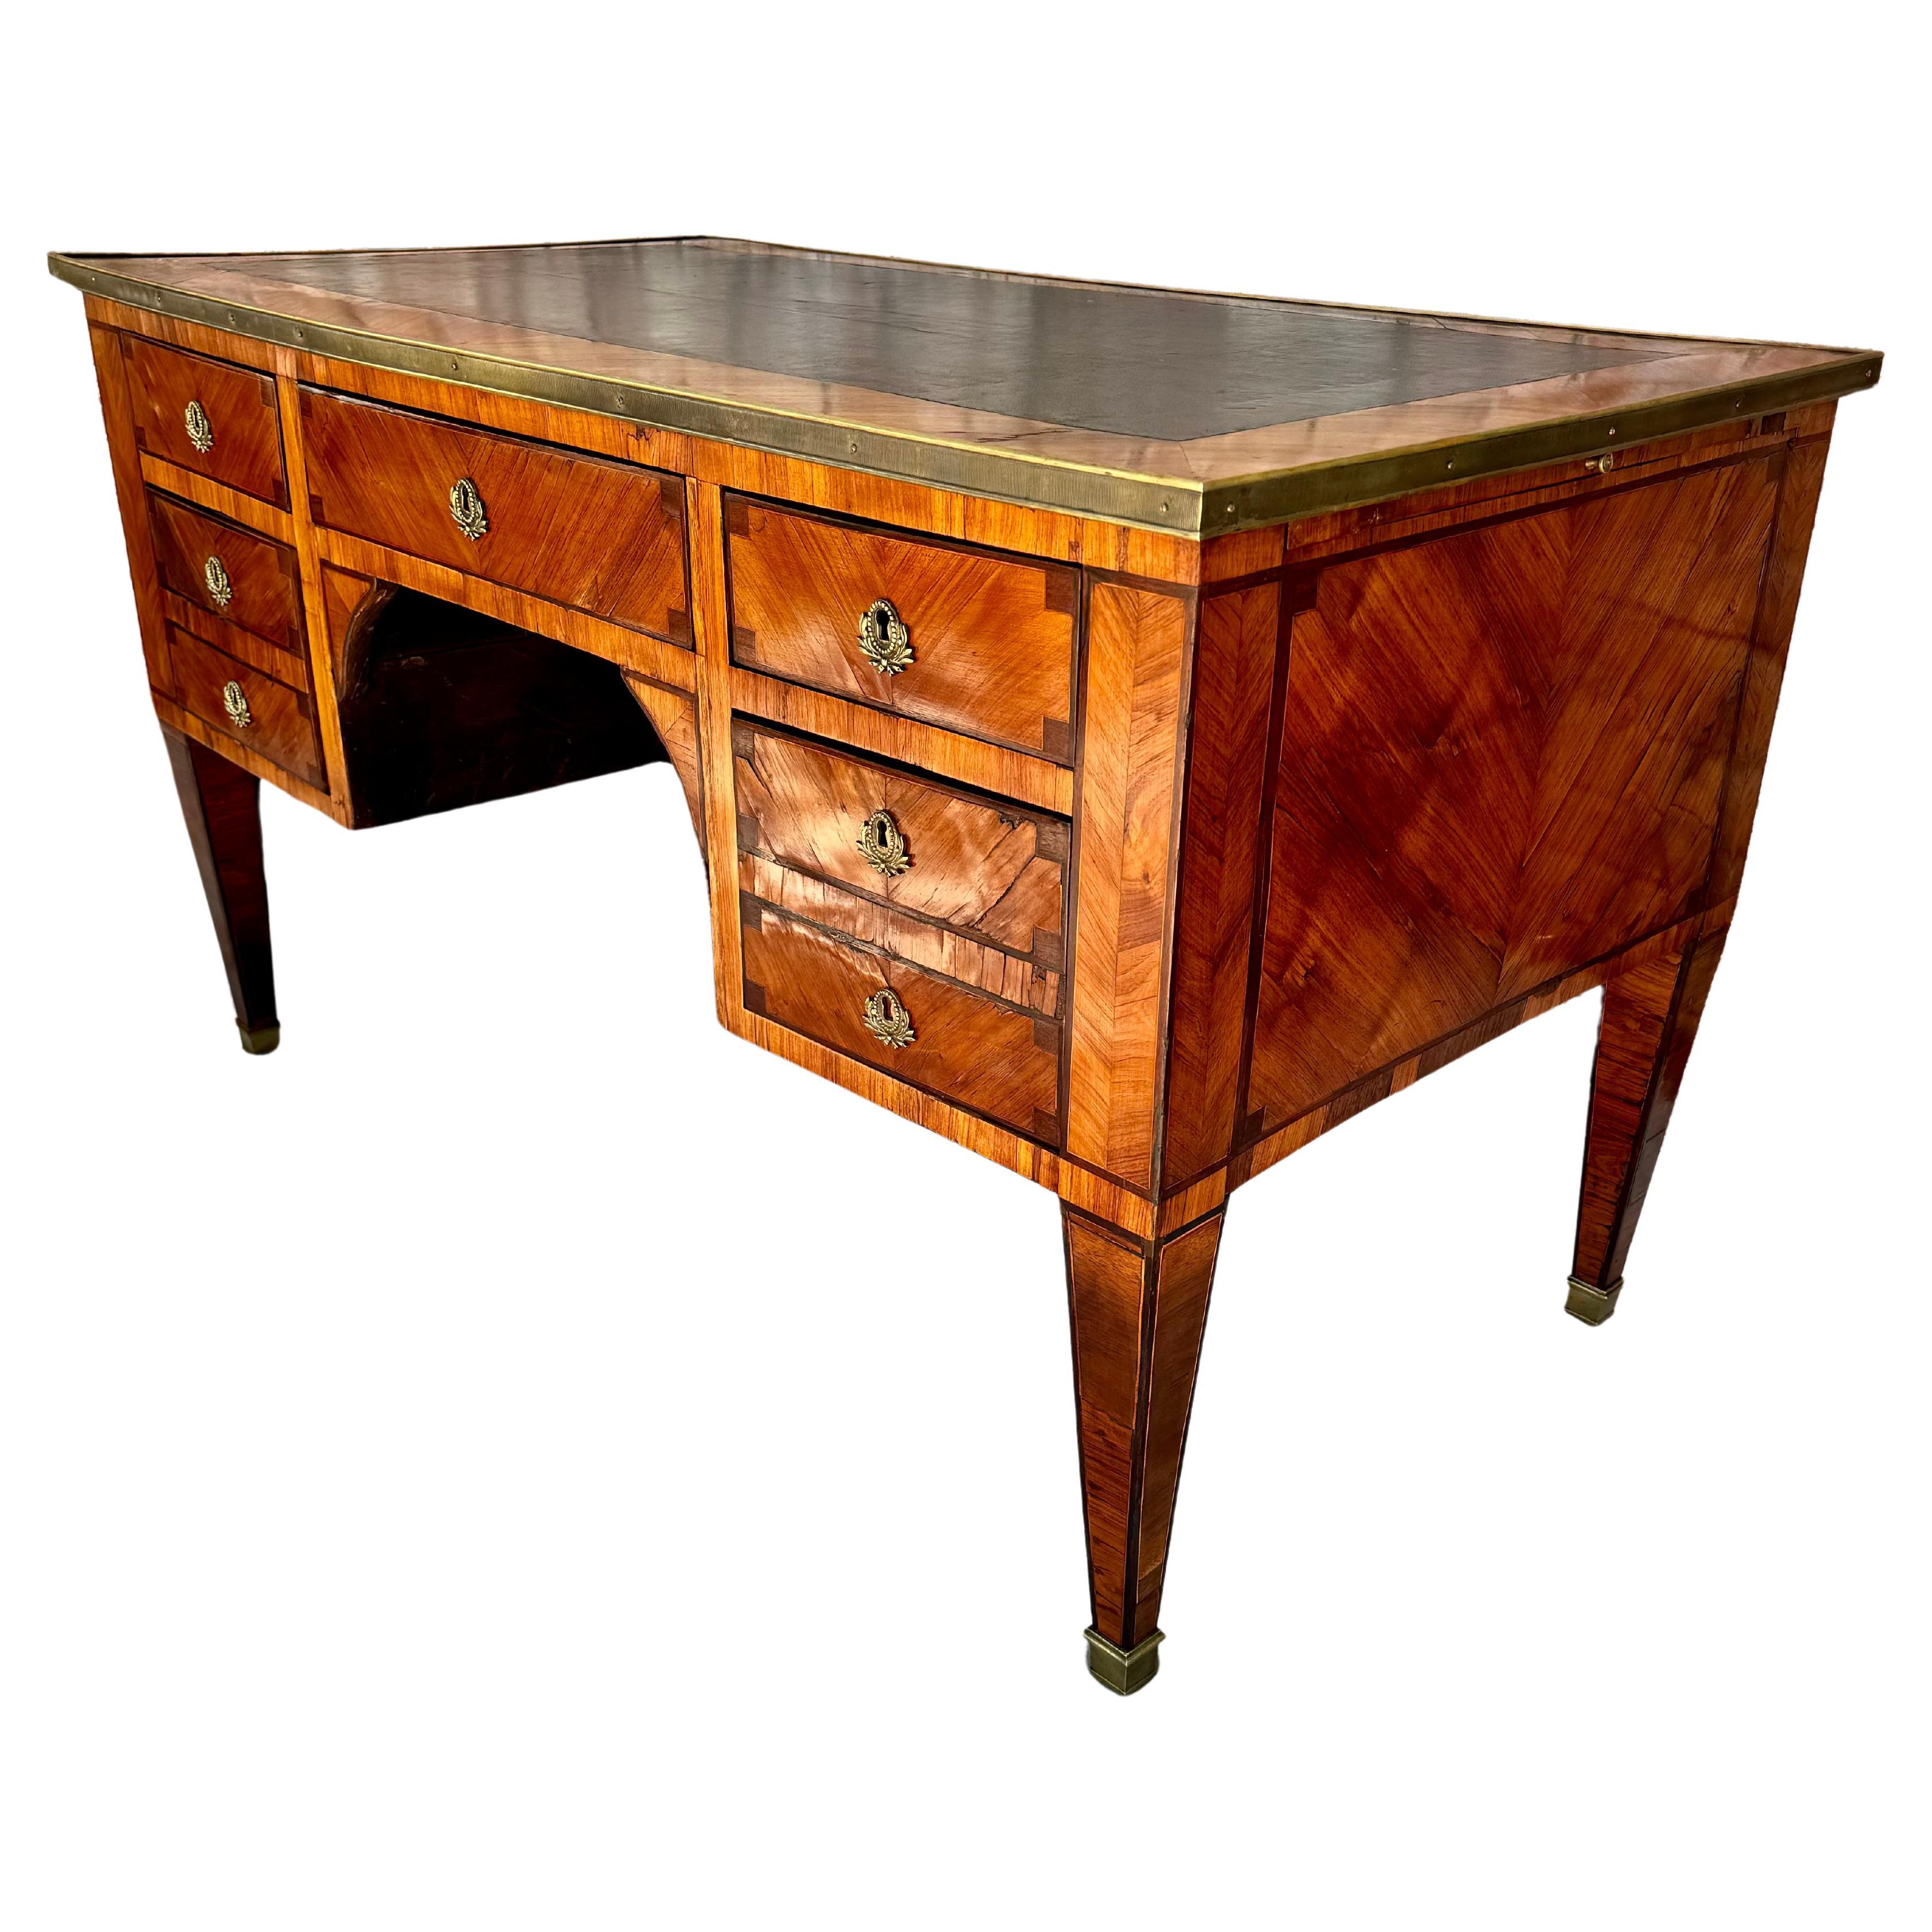 Handsome late 18th Century French Louis XVI style writing desk with leather insert on top. Desk features a middle drawer, with three drawers on left and three drawers on right side. Brass hardware and tapered legs. Desk has completely finished front